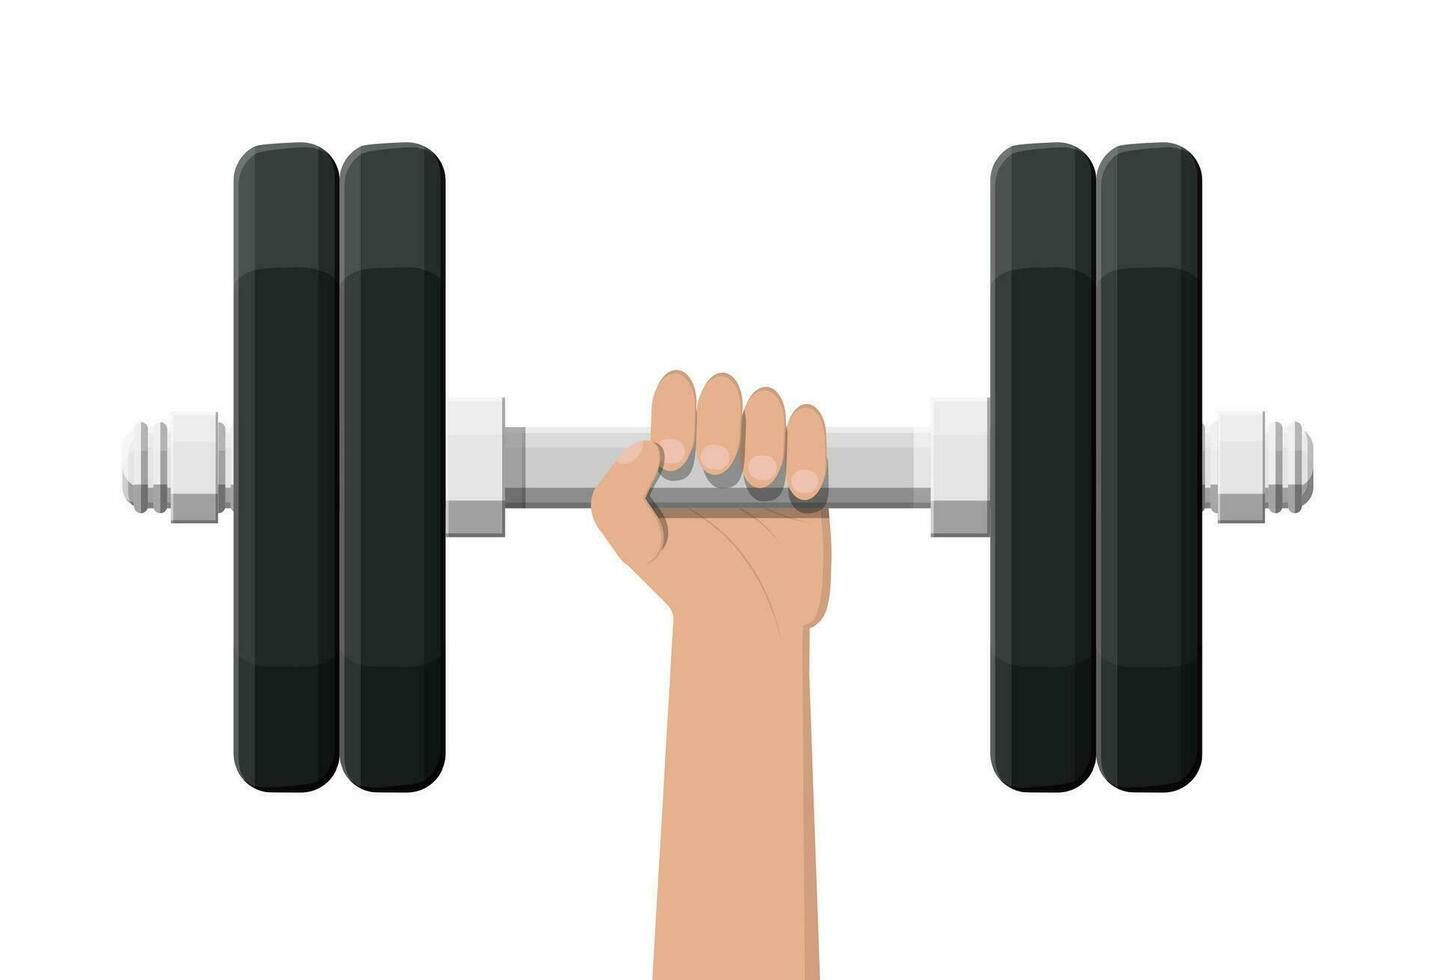 Dumbbell with metal weights. Gym workout equipment, Fitness, healthy and sport lifestyle. Strength and bodybuilding training. Vector illustration flat style